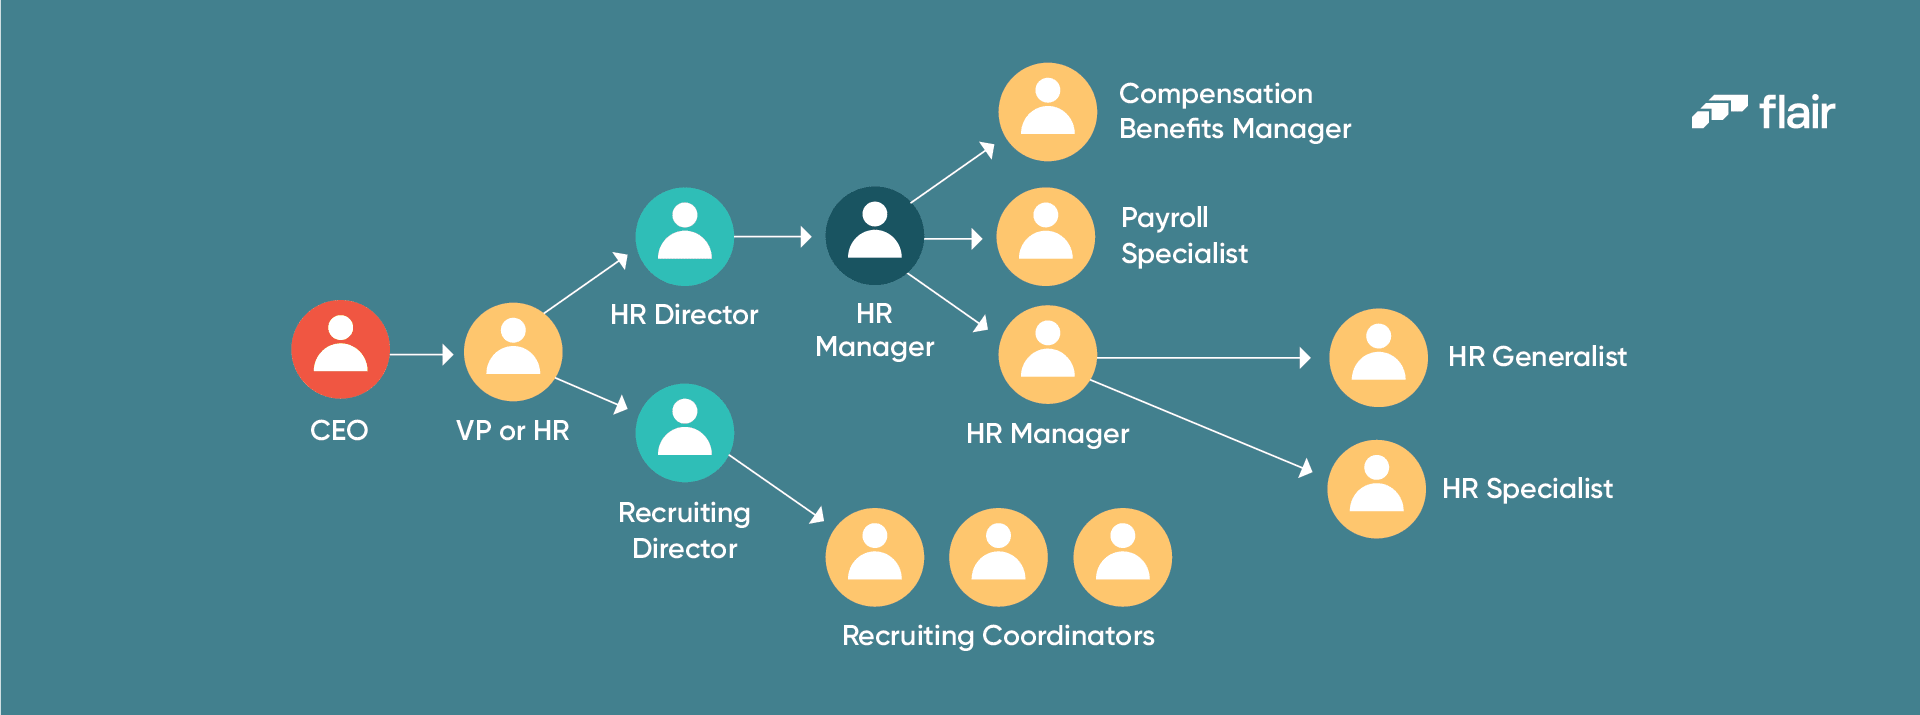 Example of an organizational chart for HR teams.